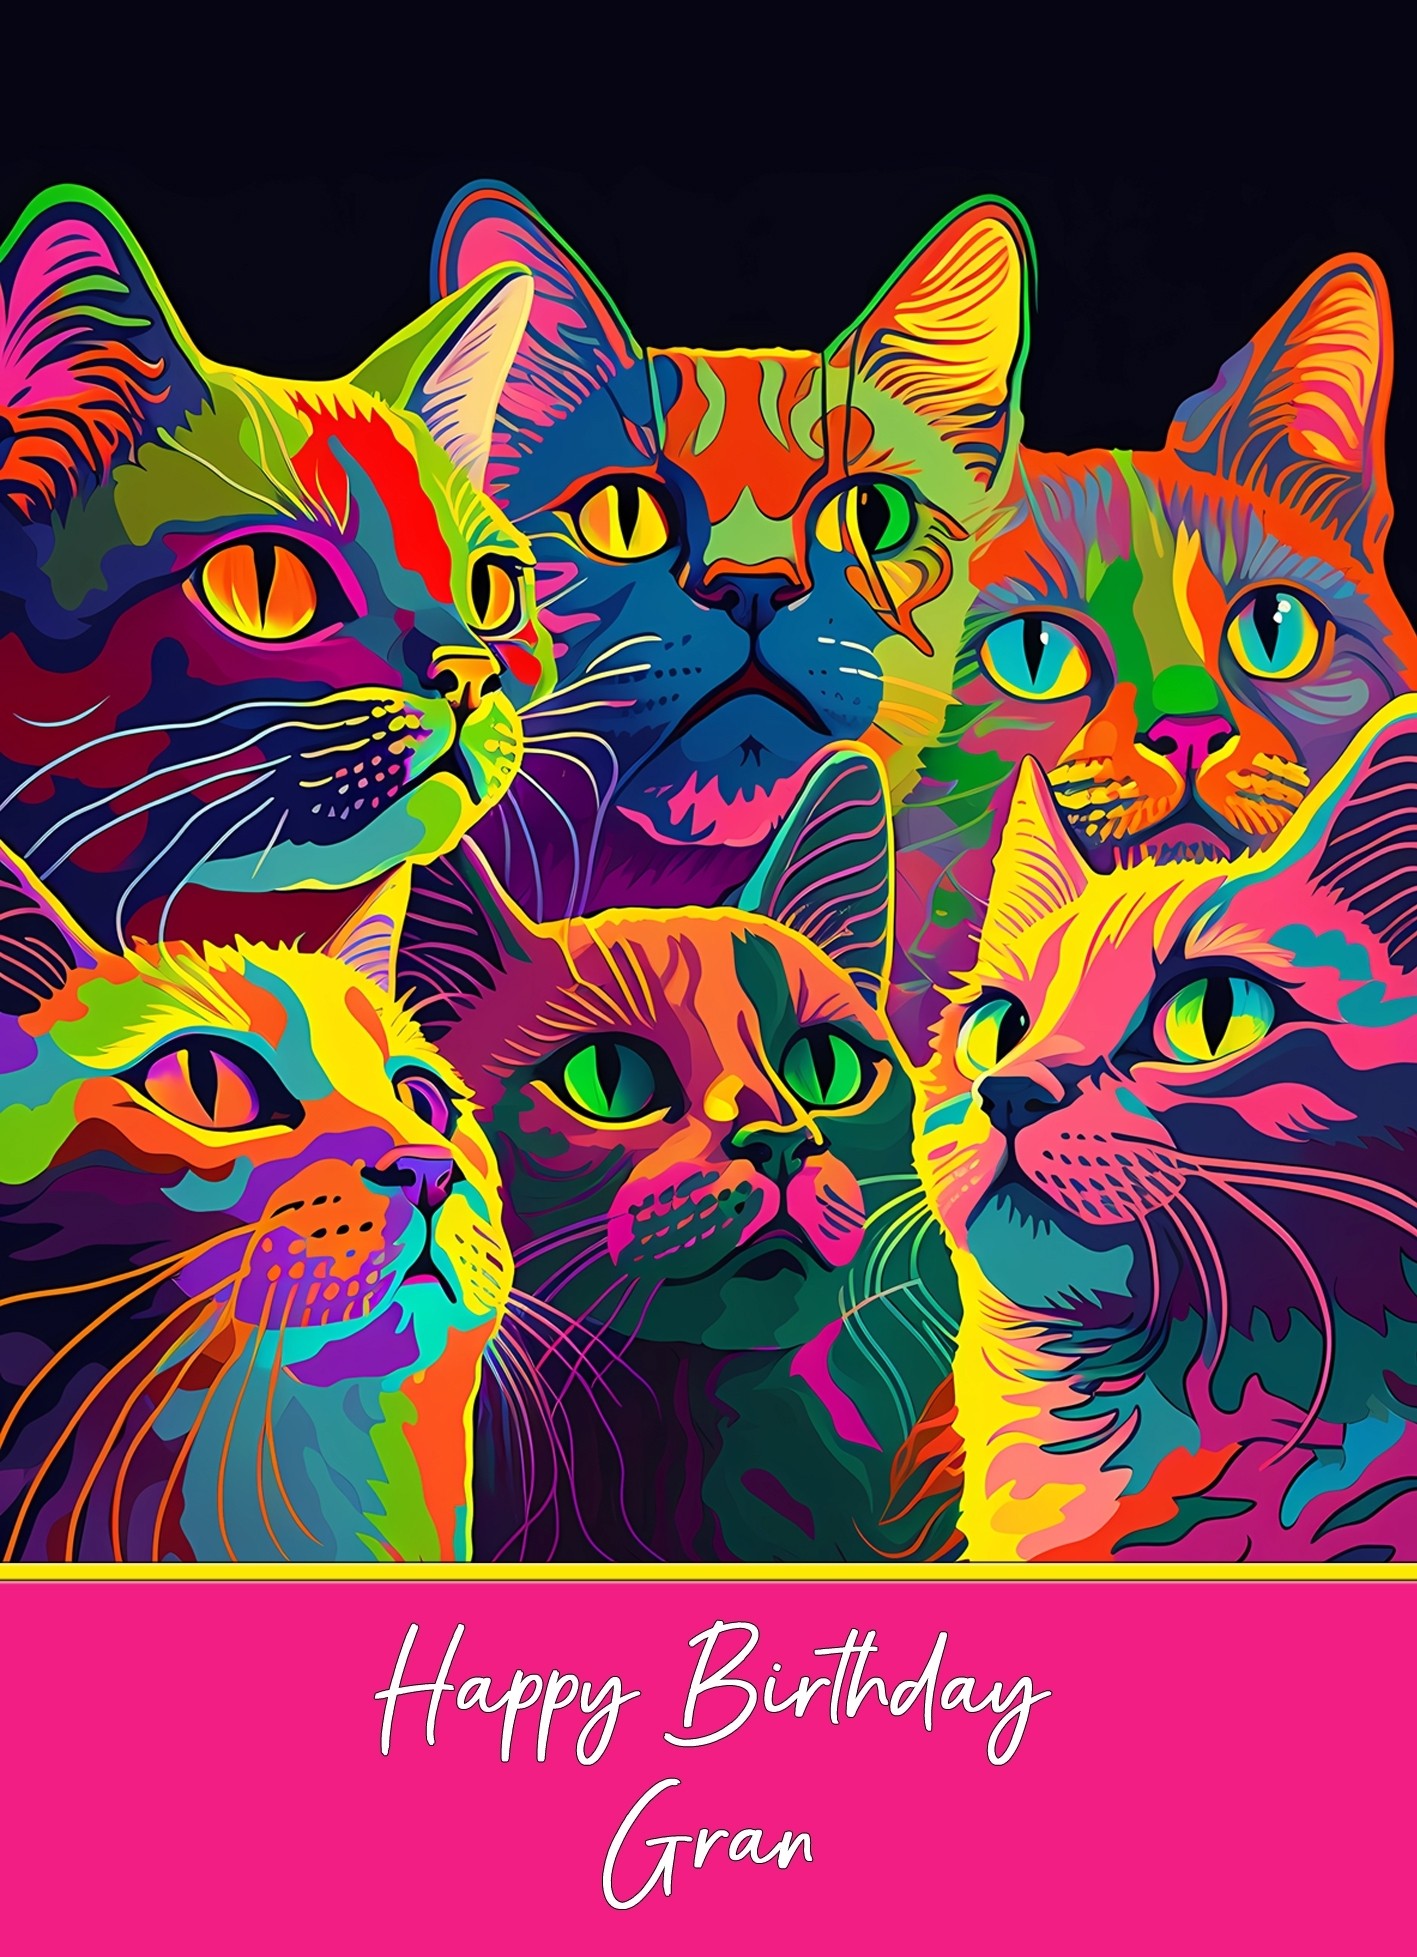 Birthday Card For Gran (Colourful Cat Art)